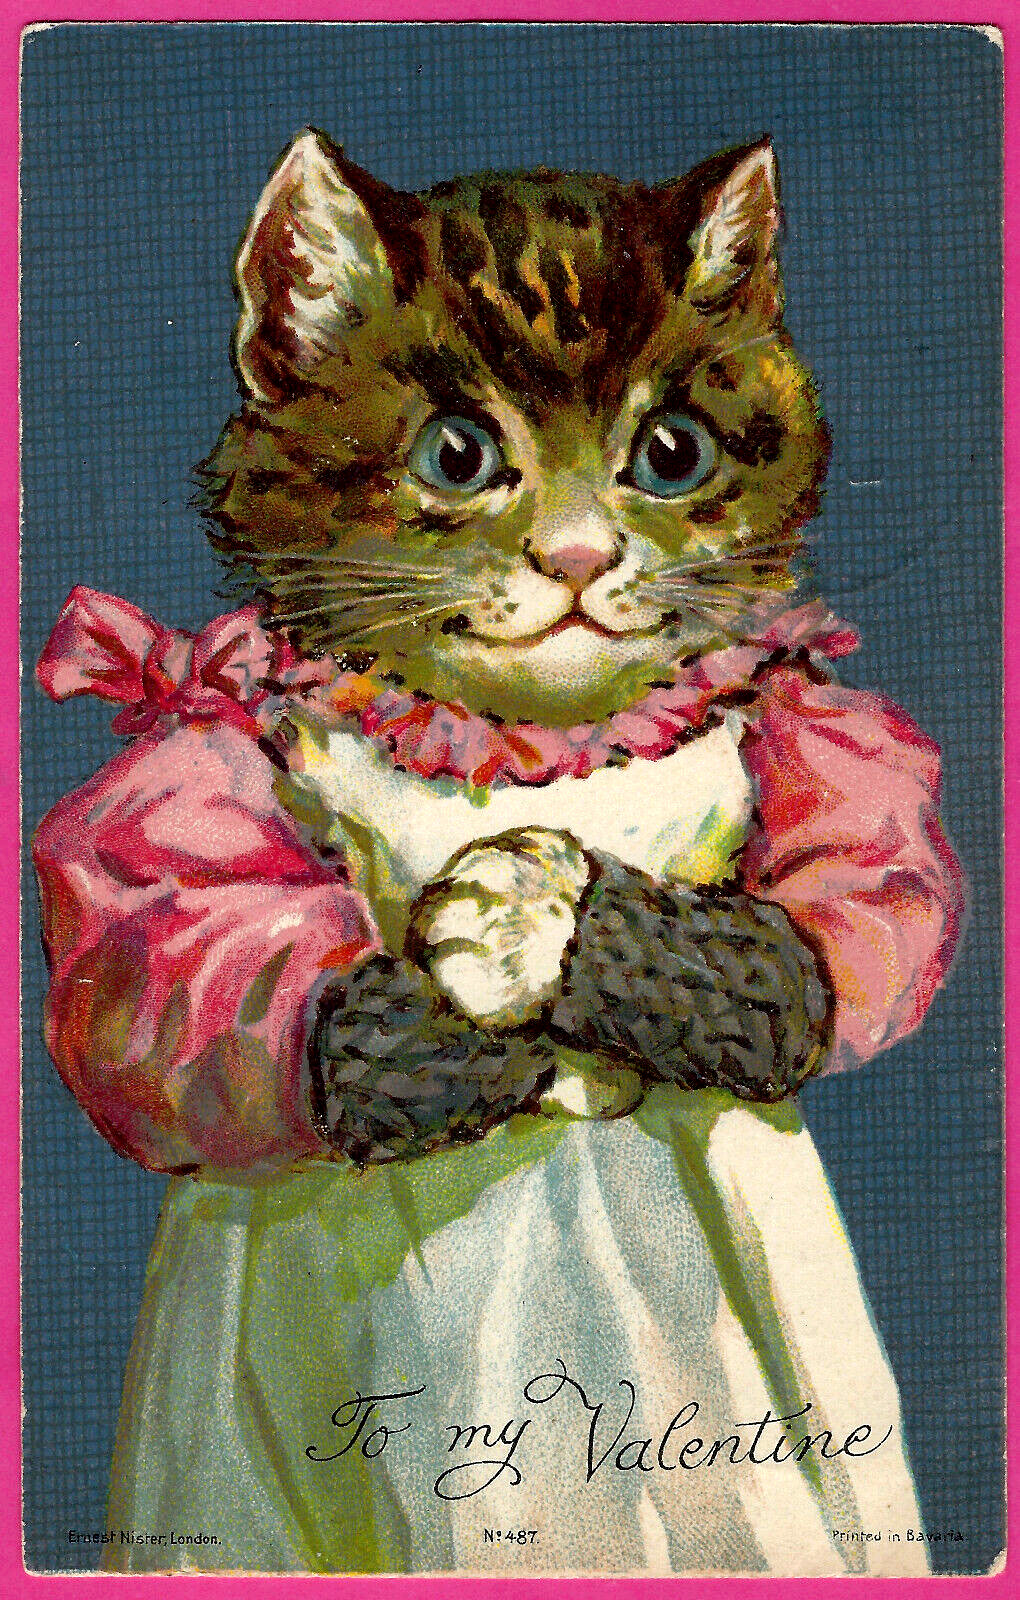 Vtg Nister Dressed Tabby Cat Pink w/Pinafore GH Thompson Valentine PC UDB c1900s